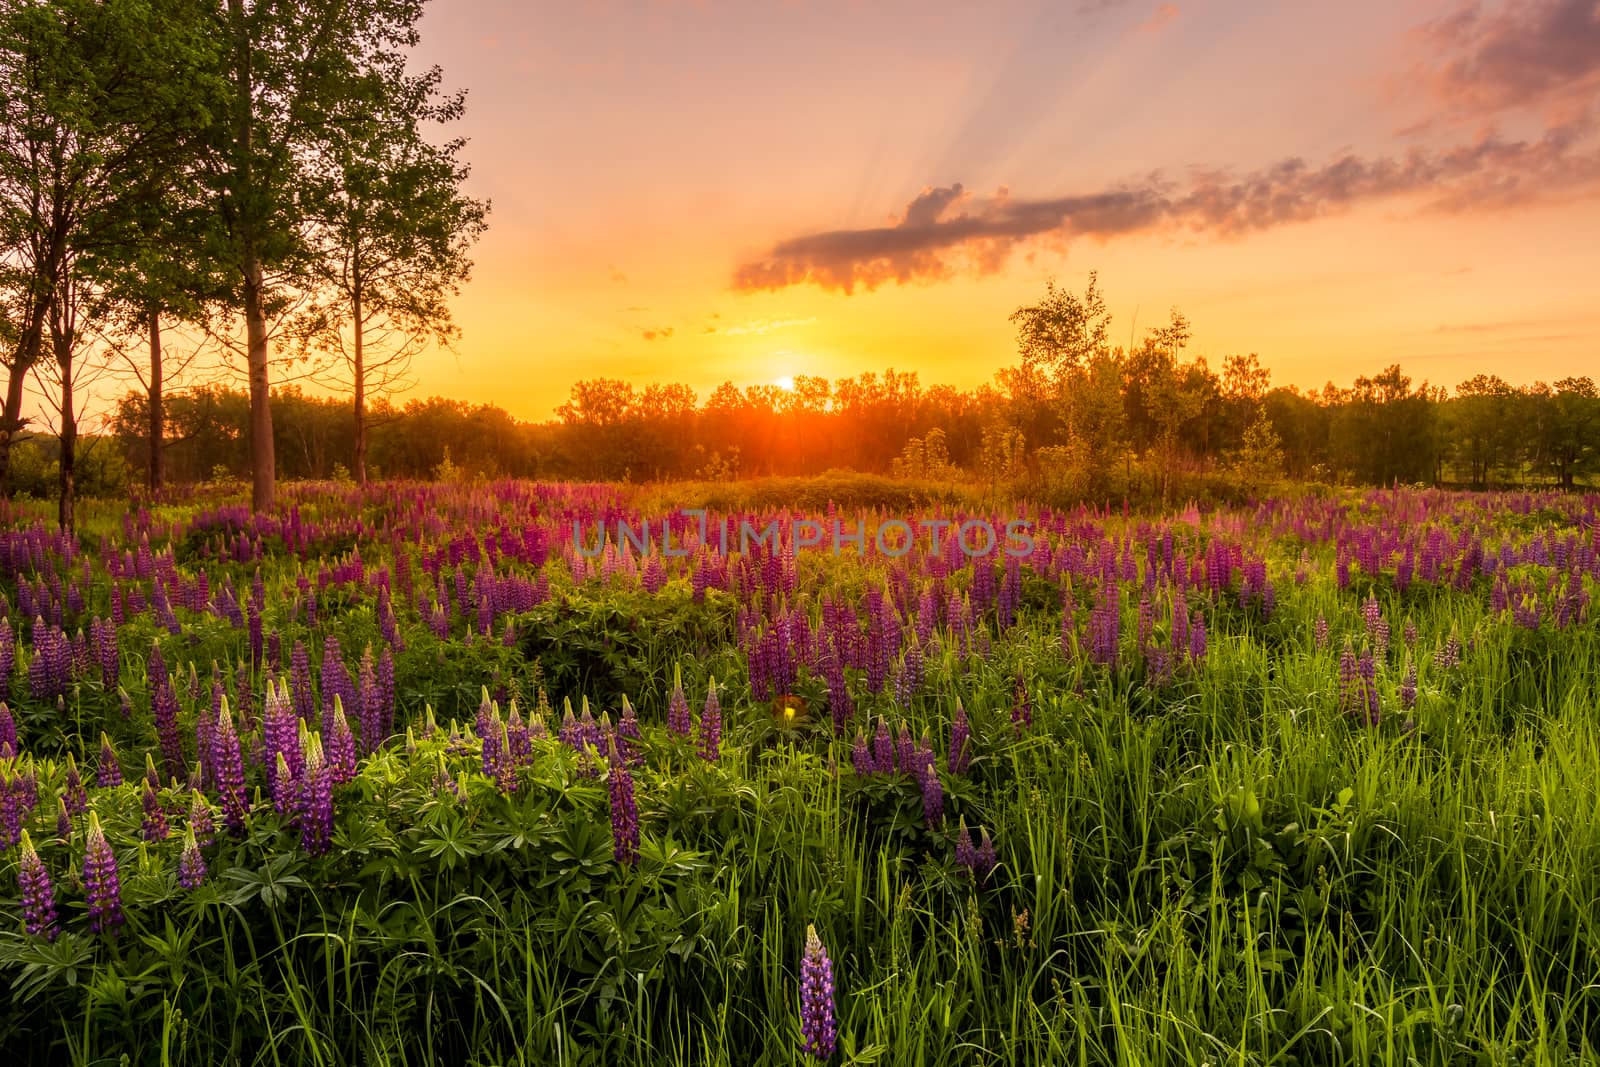 Sunrise on a field covered with flowering lupines in spring or early summer season with trees on a foreground in morning. Landscape.